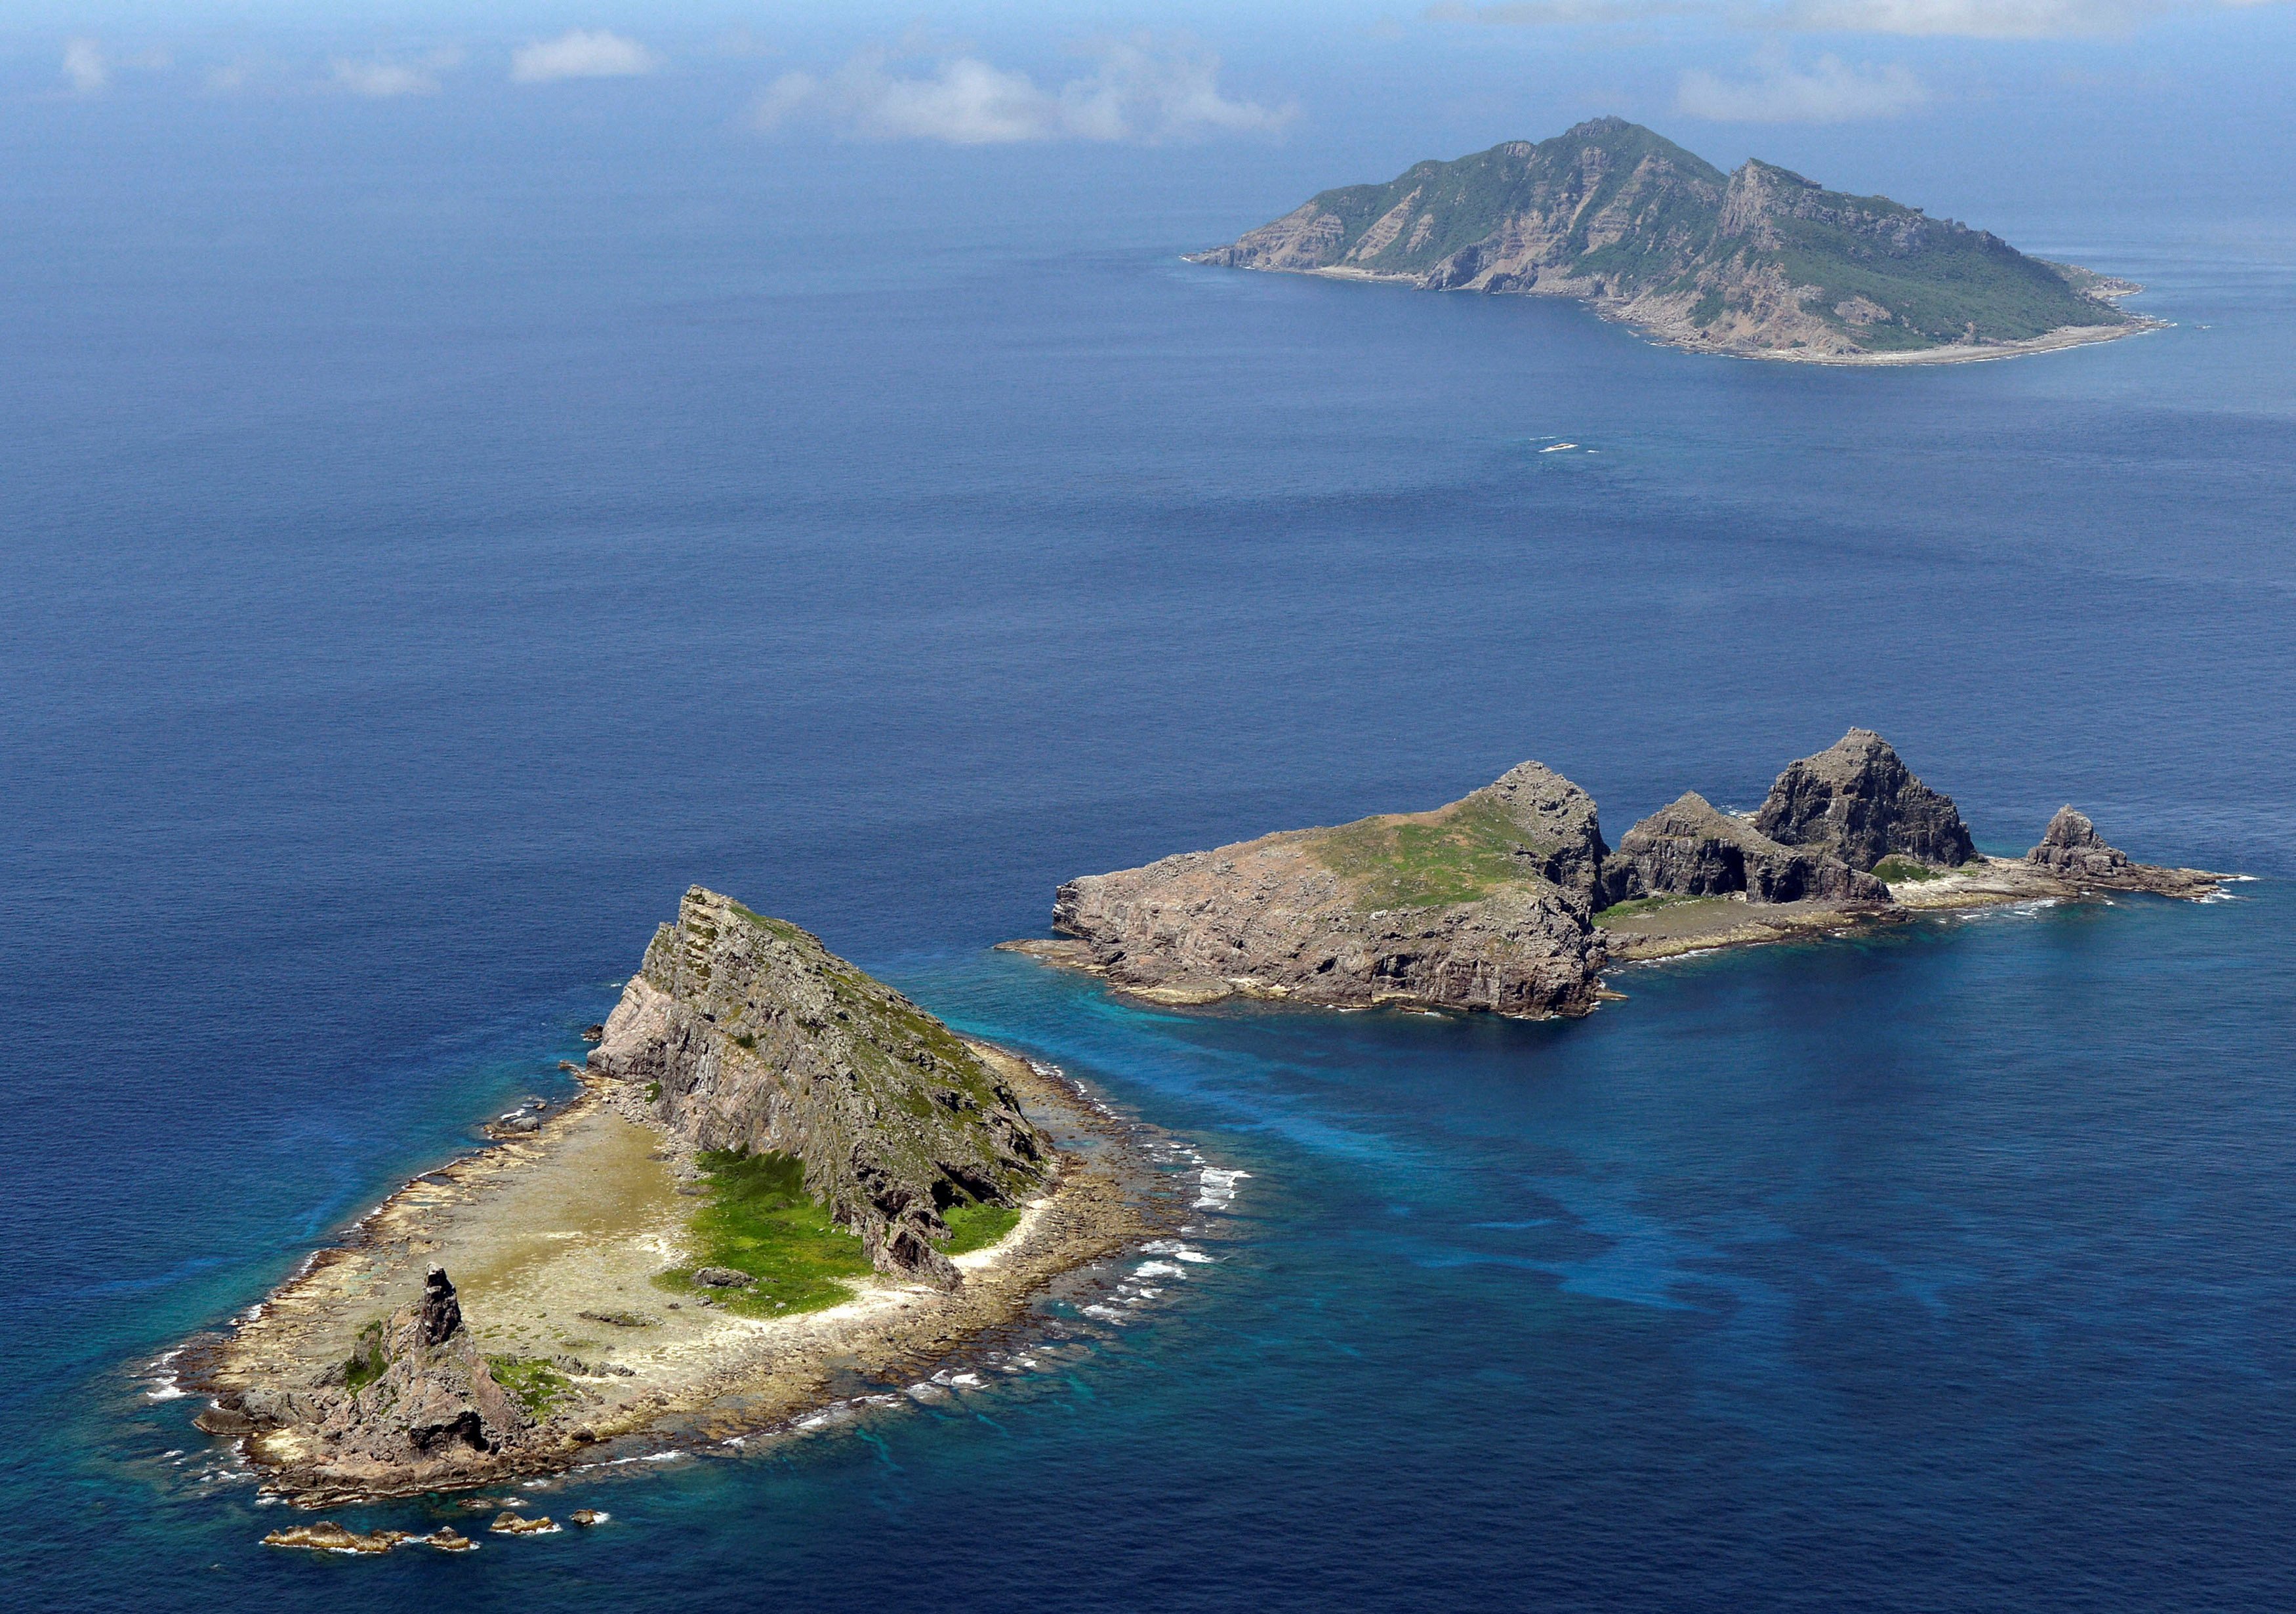 The Diaoyu/Senkaku Islands. On Monday, Japan’s coastguard said it had observed Chinese vessels sailing near the disputed islets for a record 158th day. Photo: Kyodo via Reuters